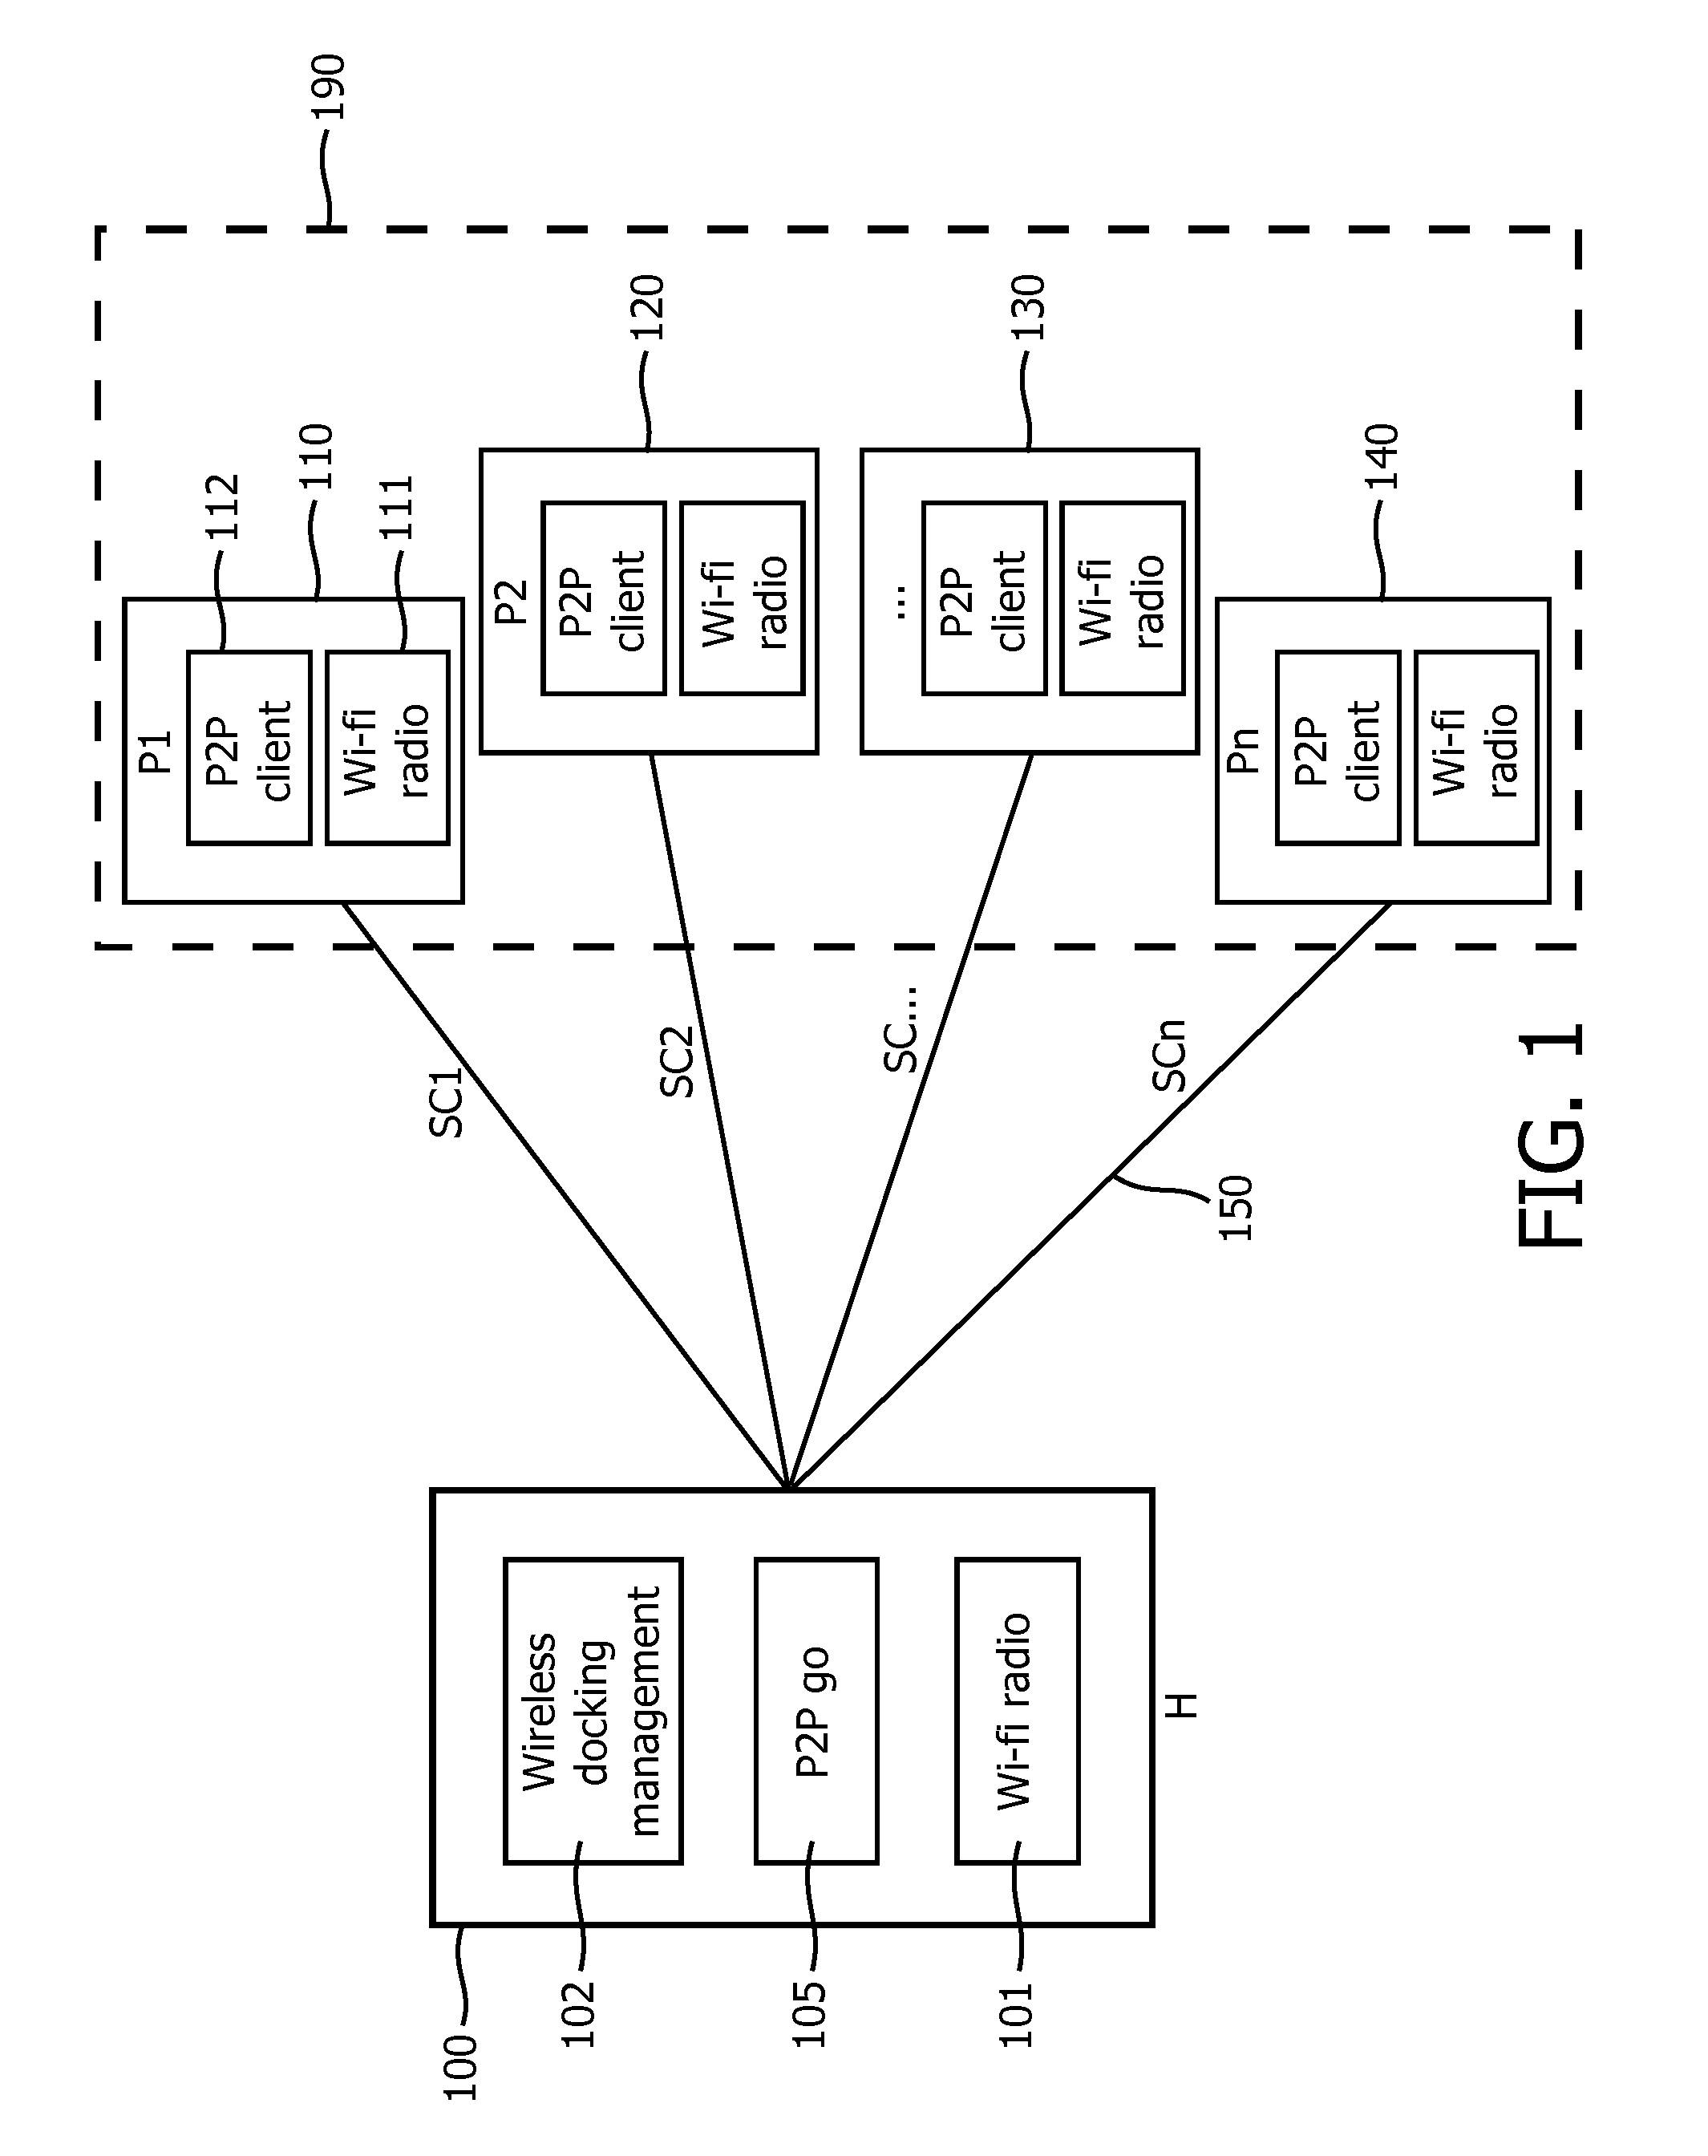 Method and devices for pairing within a group of wireless devices